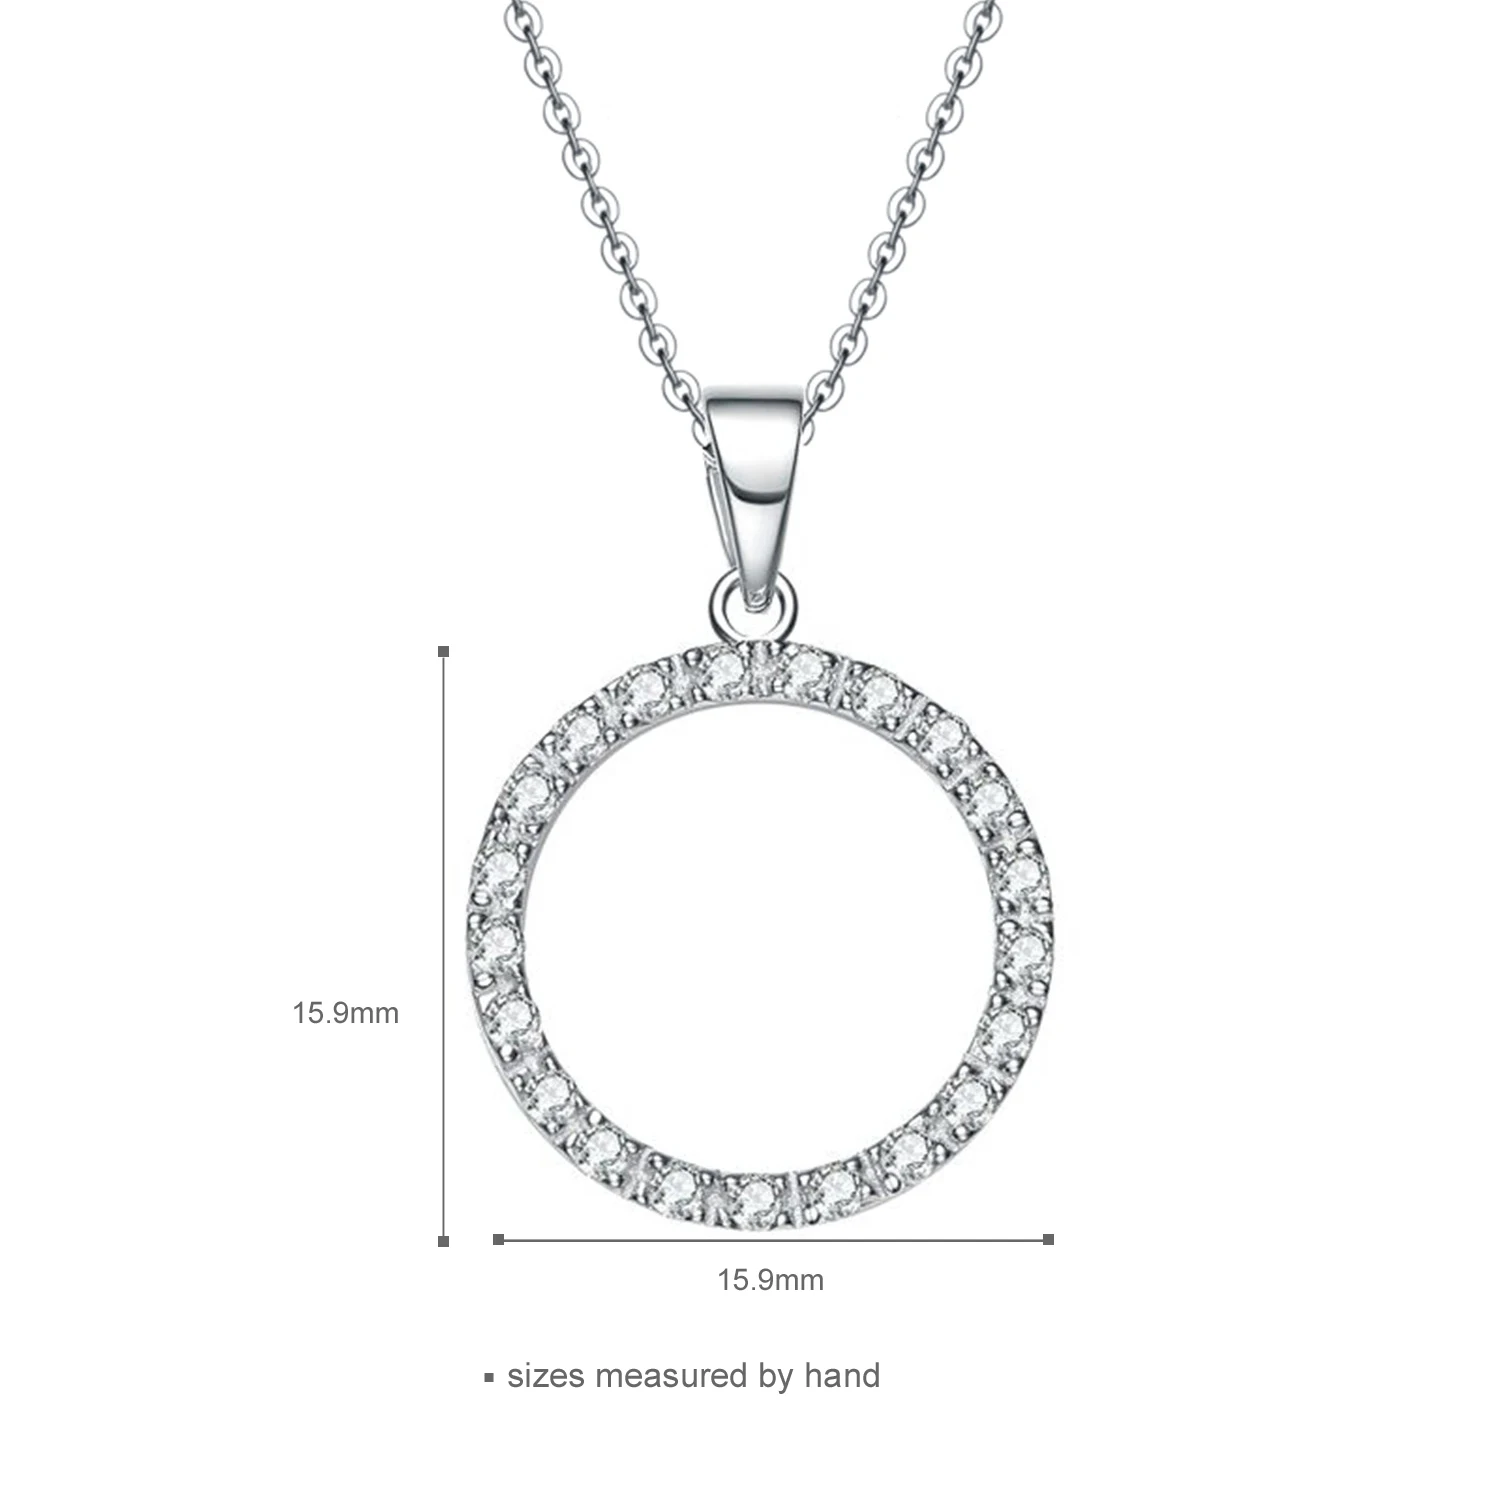 Rhodium Plated Minimalist Pendant Necklce Earrings 925 Sterling Silver High Quality Jewelry Set (图5)